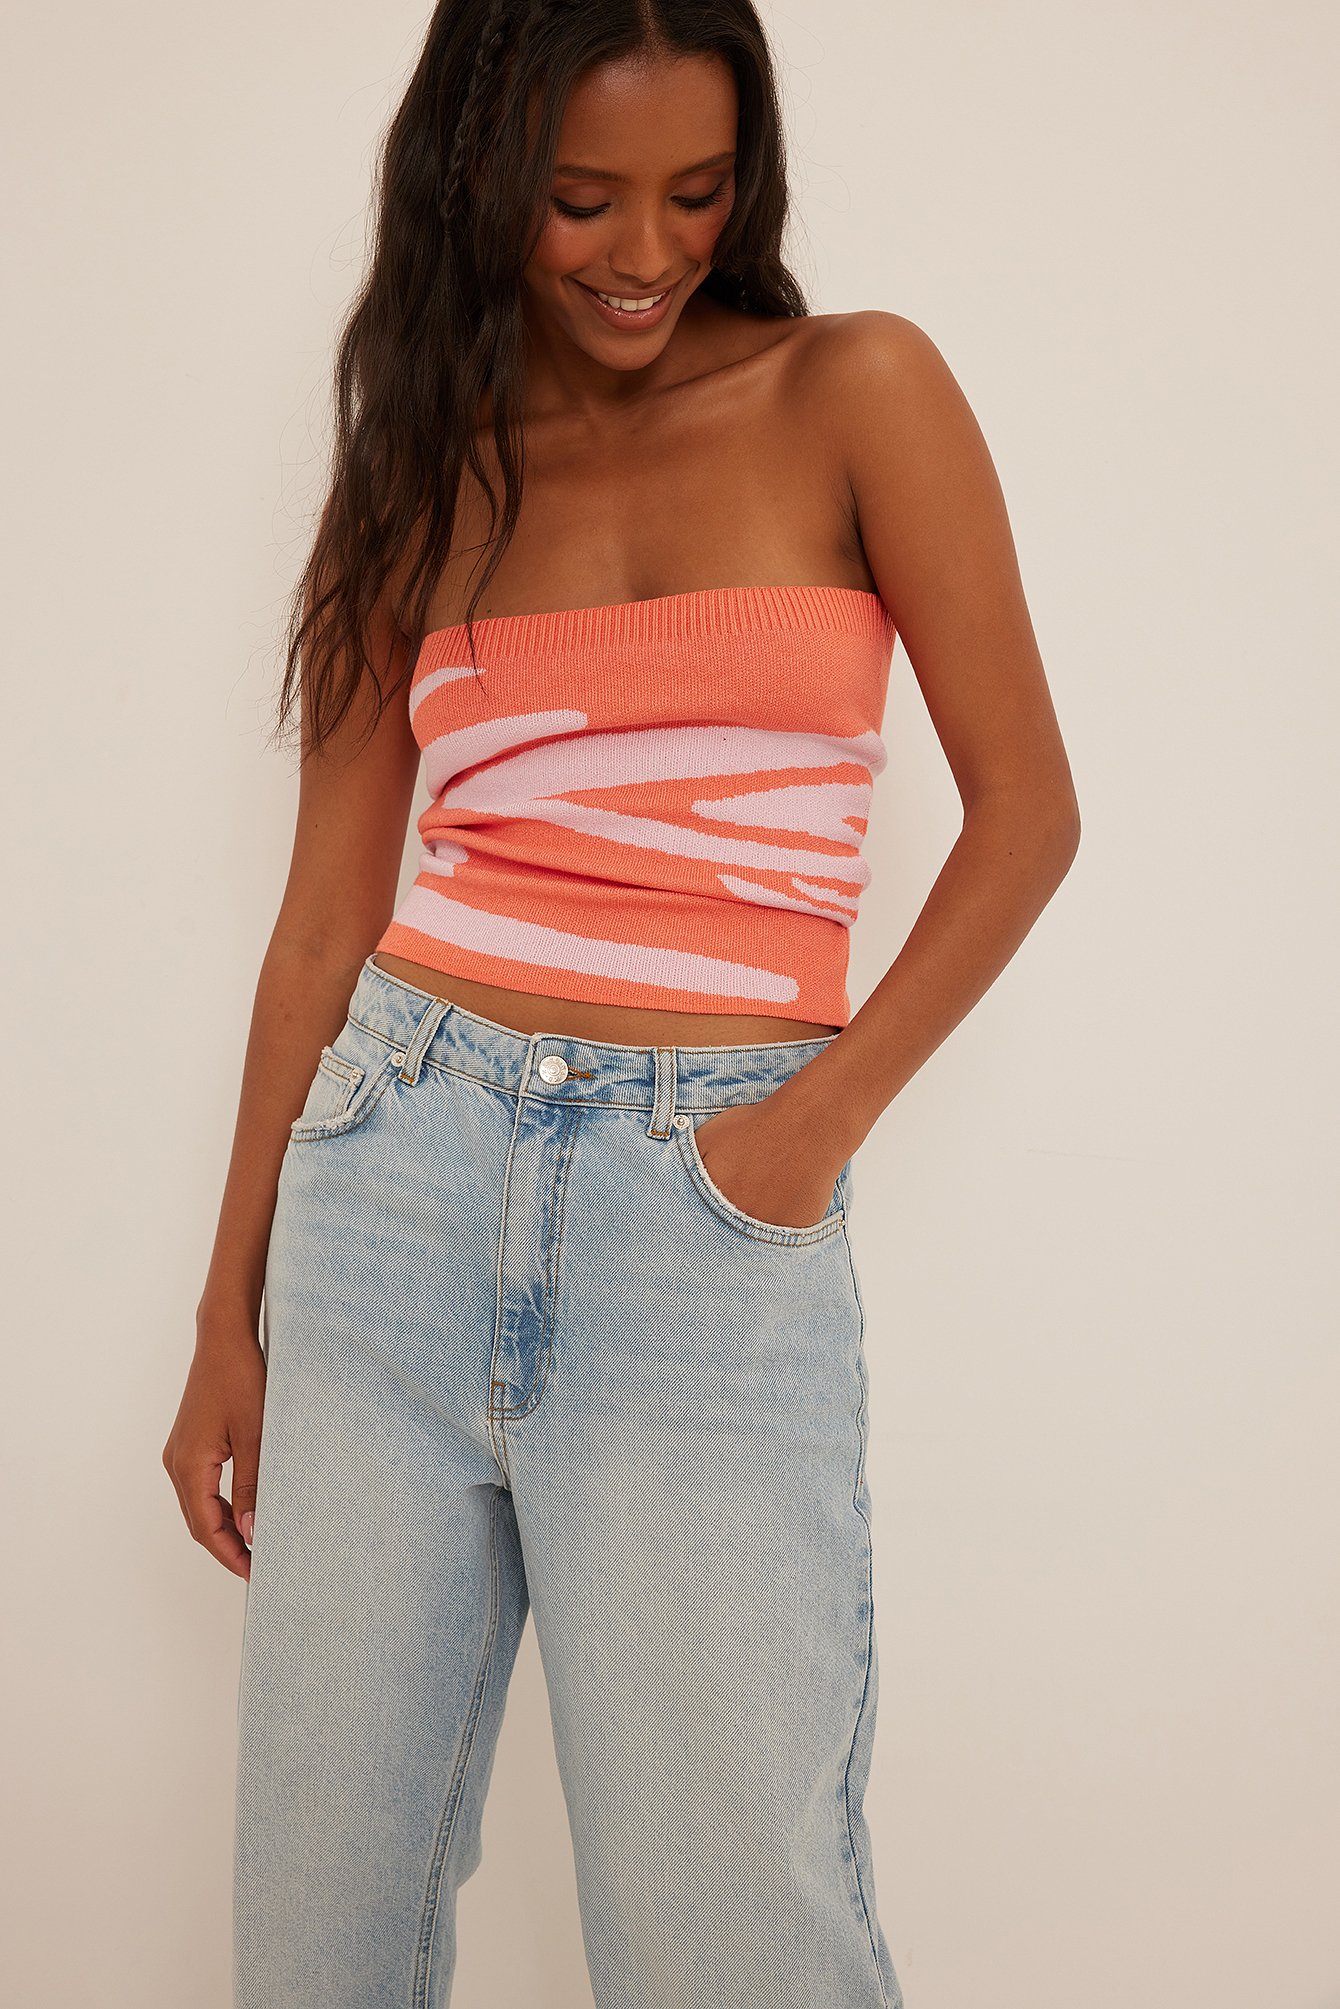 Coral Pink Tube top